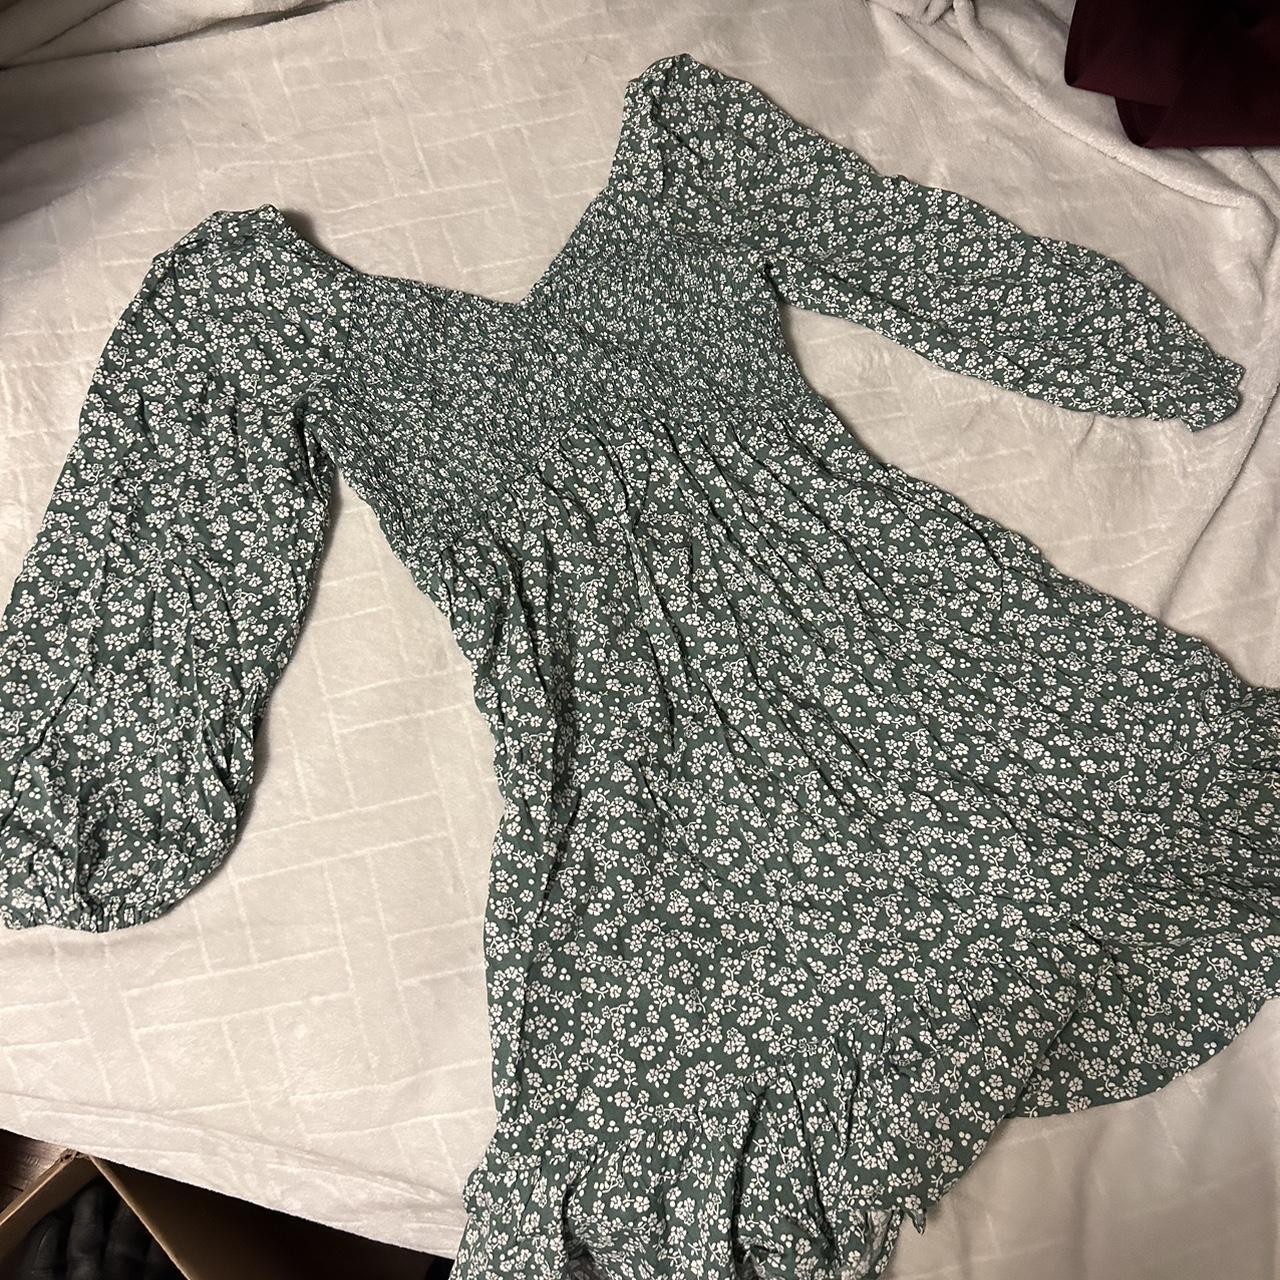 Hollister green floral sundress with puffy sleeves - Depop